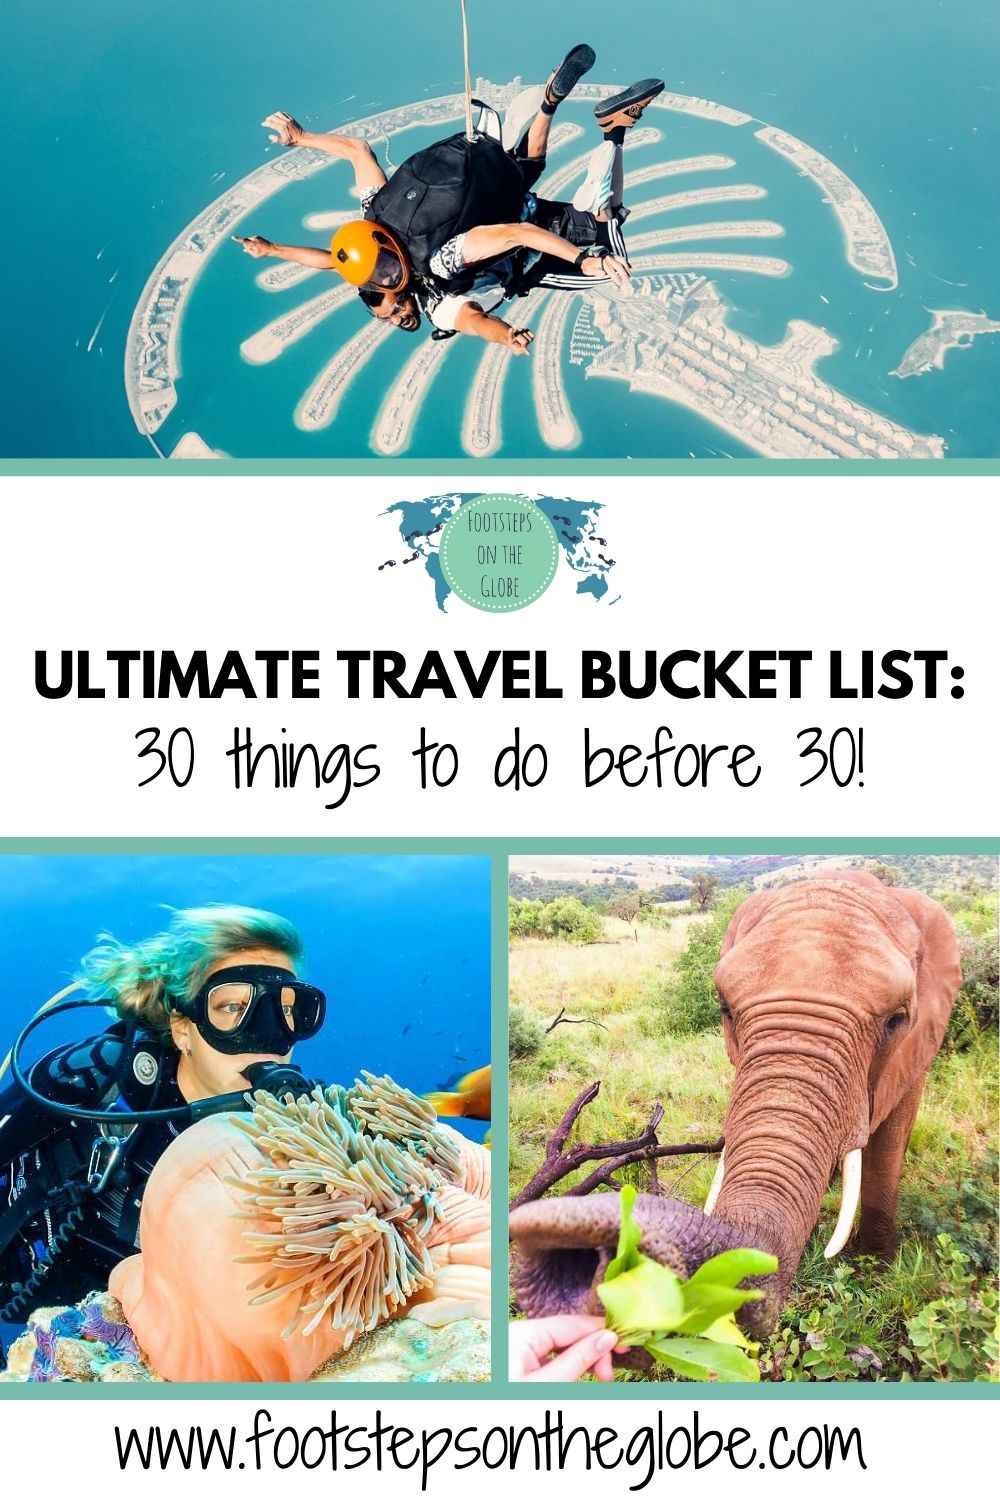 ULTIMATE TRAVEL BUCKET LIST: 30 things to do before 30! Pinterest image